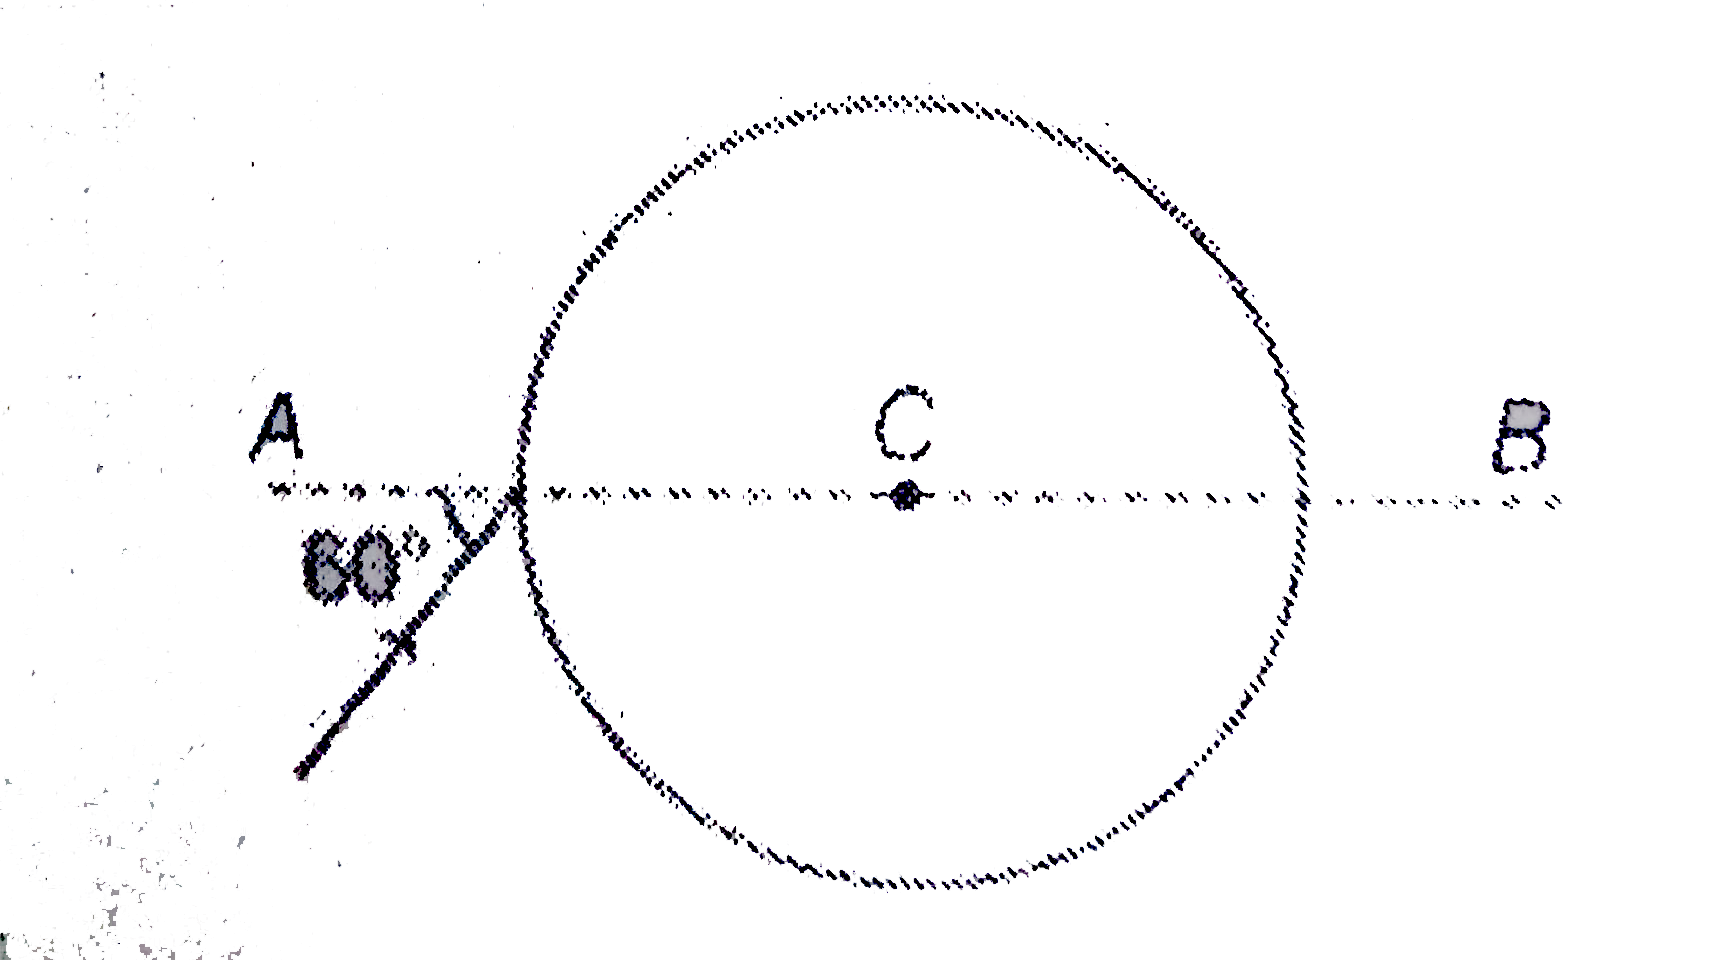 A ray of light falls on a transparent sphere with centre at C as shown in figure. The ray emerges from the sphere parallel to line AB. The refractive index of the sphere is